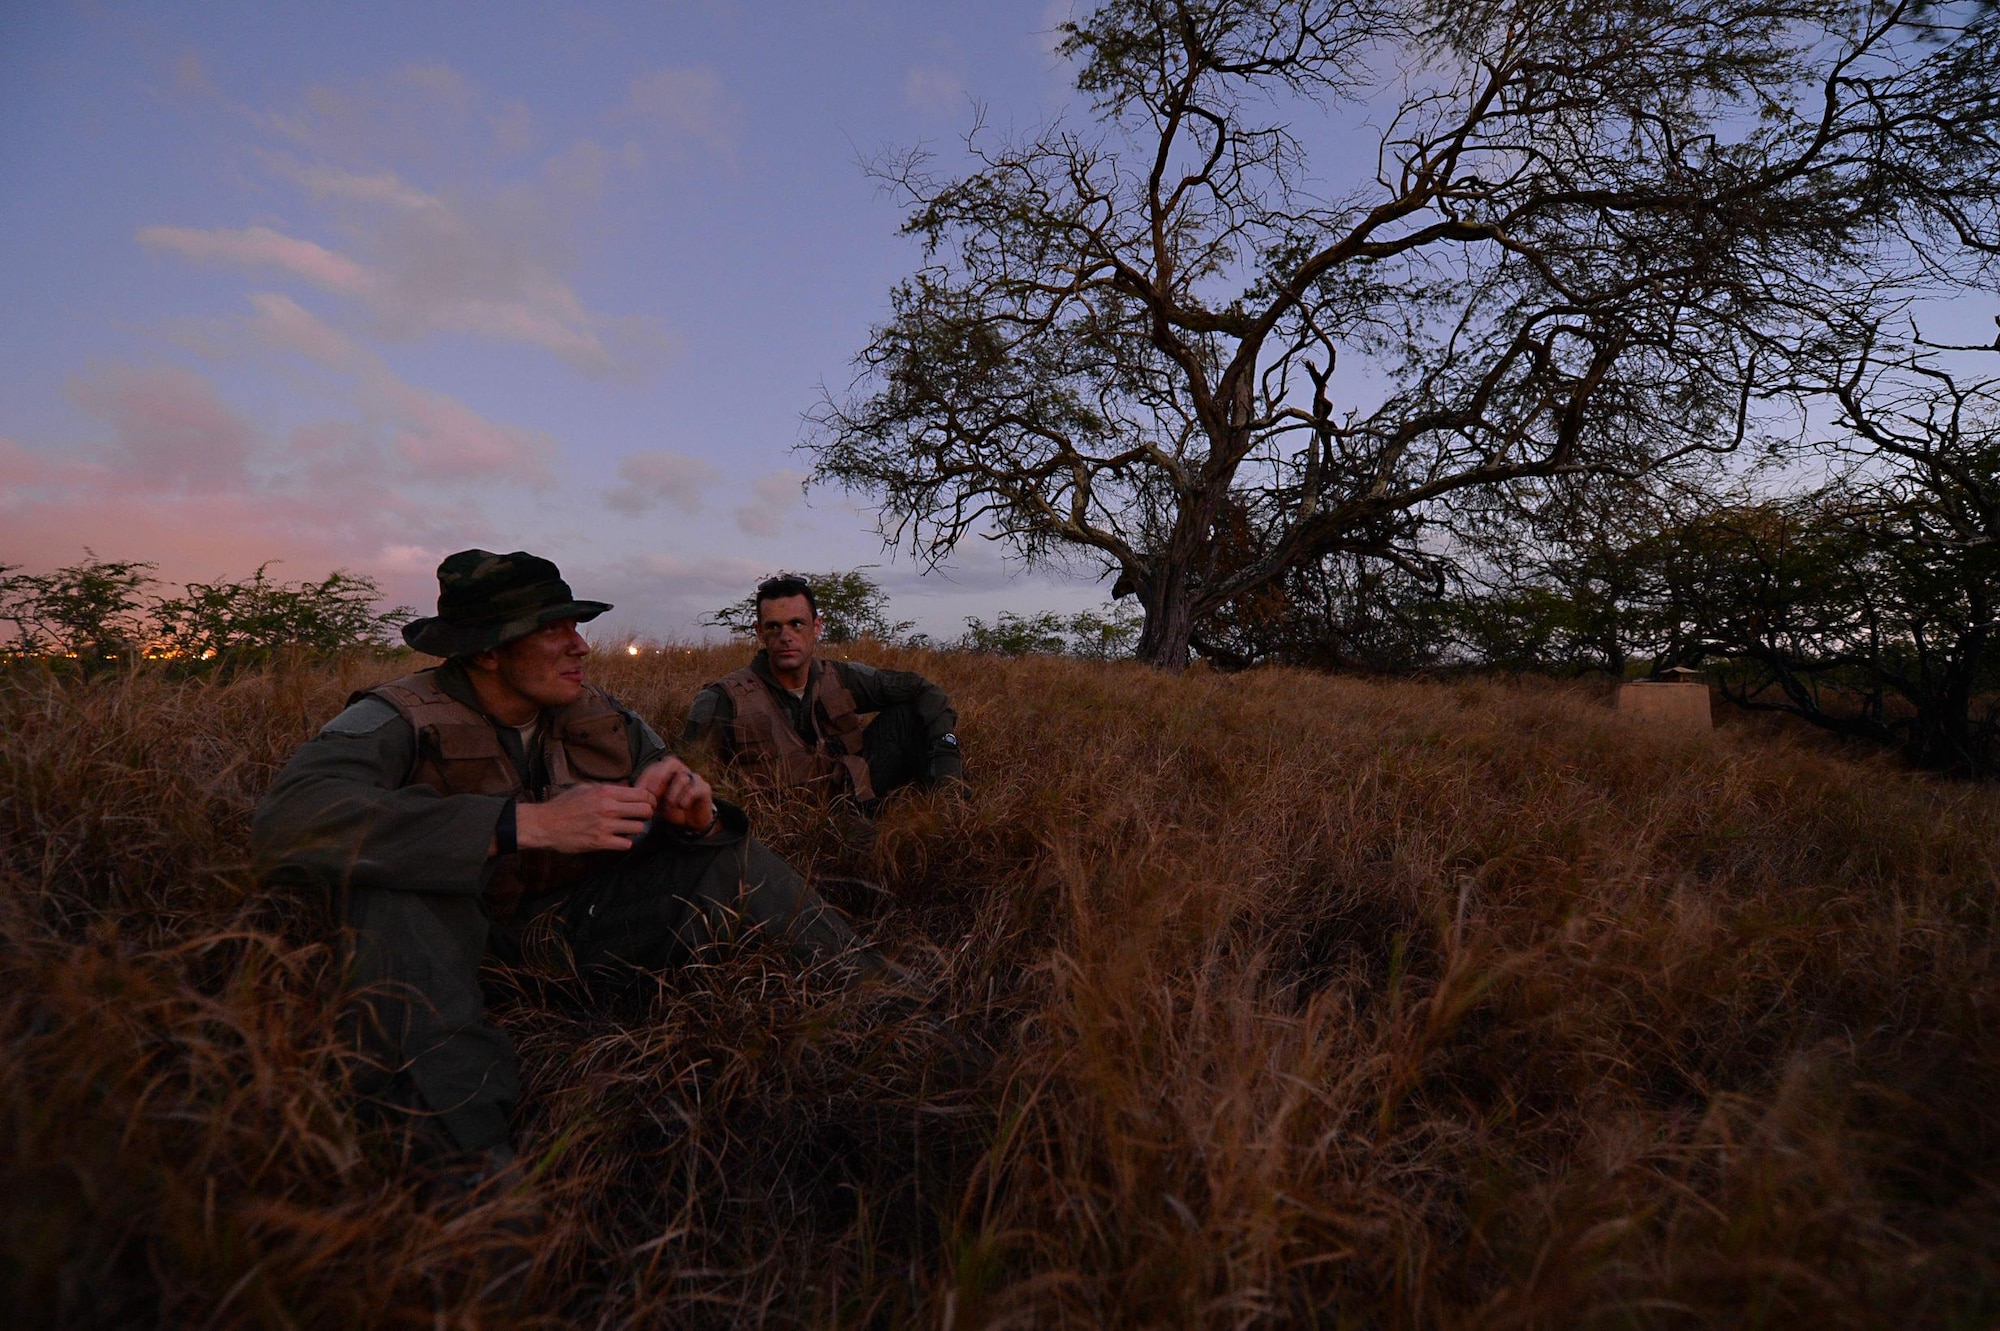 Capt. Matt Savage and Senior Airman Kenneth Stricker wait for two team members to return during combat survival training March 26, 2015, at Joint Base Pearl Harbor-Hickam, Hawaii. This training simulates the aircrew going down in a hostile environment. The aircrew uses teamwork to conceal their location, evade opposition forces and practice proper recovery procedures. Savage is a pilot and Strickler is a boom operator for the 96th Air Refueling Squadron. (U.S. Air Force photo/Tech. Sgt. Aaron Oelrich

